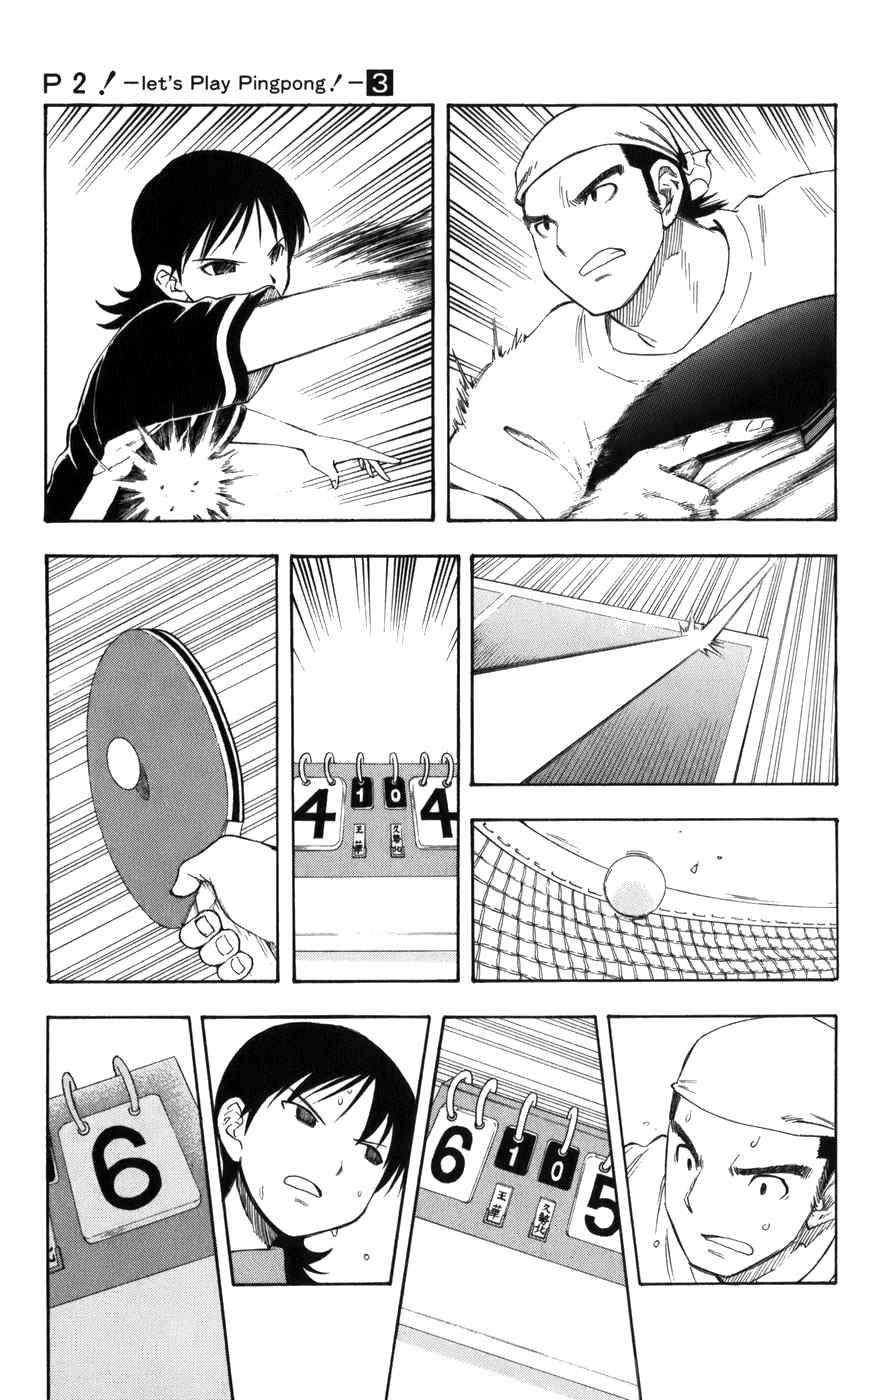 P2! let's Play Pingpong! Vol. 3 Ch. 20 The Fastest Ball Game